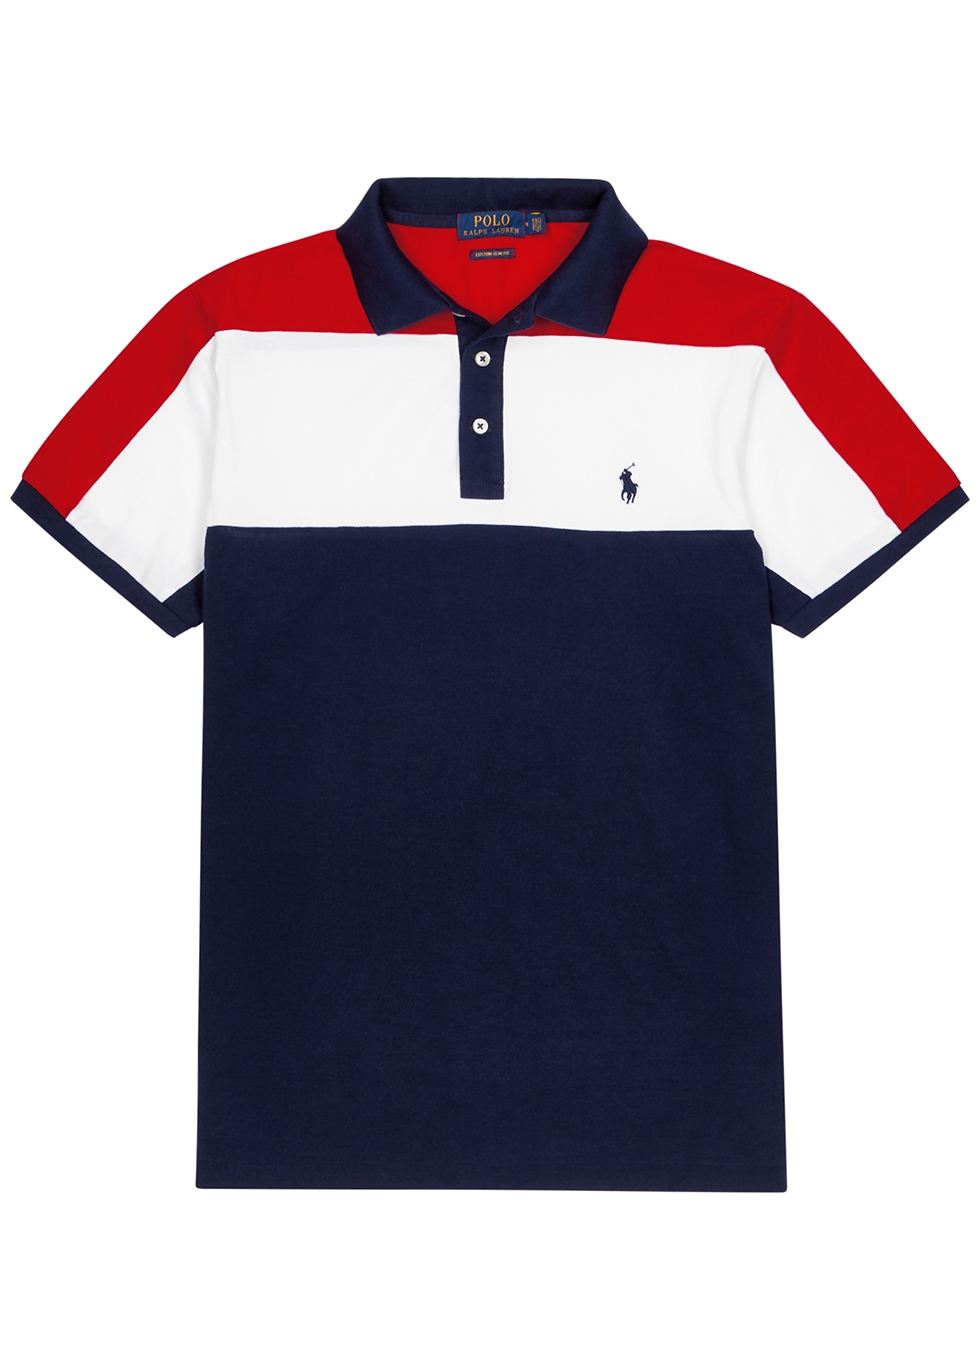 white and red ralph lauren polo